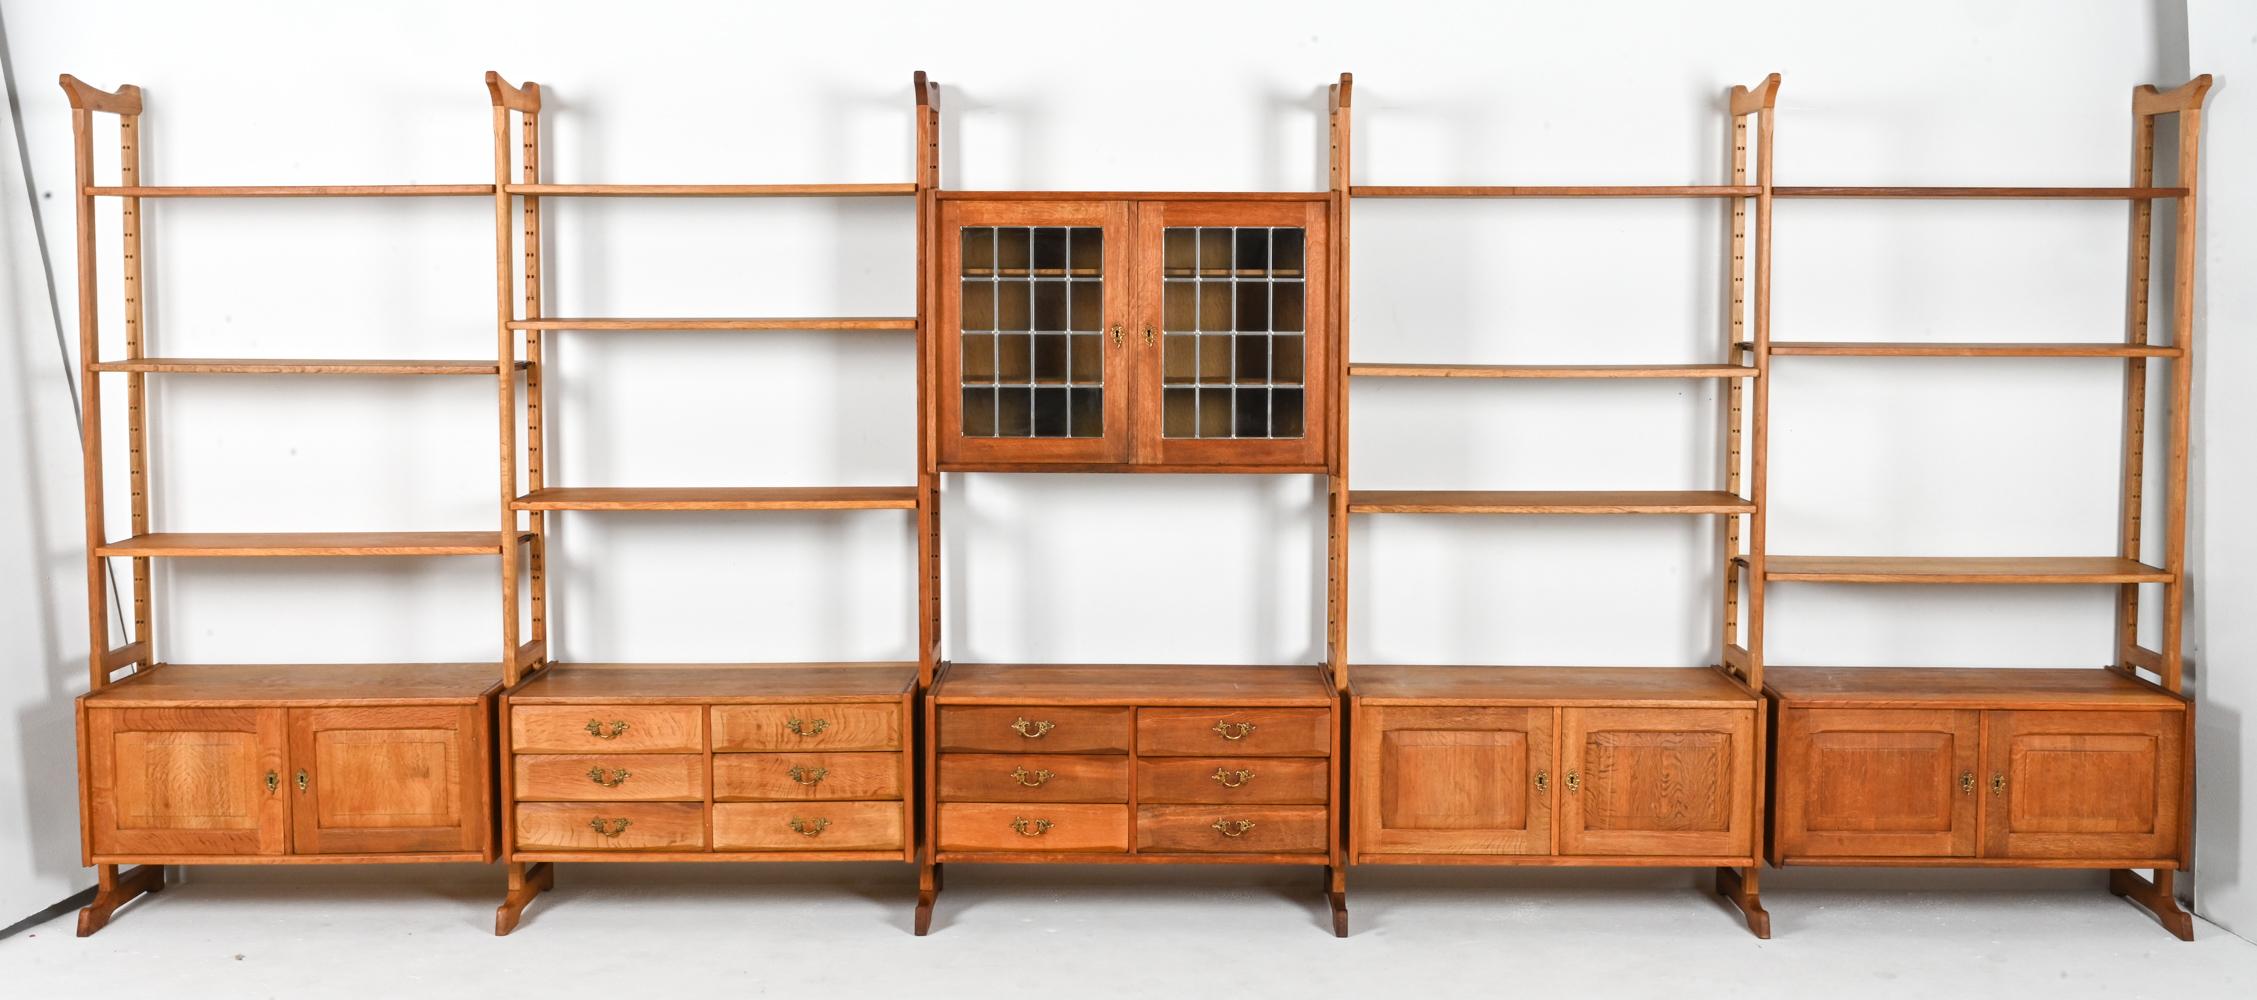 Includes: (10) free-standing vertical rails, (4) two-door cabinet units, (2) three-drawer cabinet units, (1) leaded glass cabinet unit, (13) shelves, and (2) keys. 

NOTE: Dimensions provided refer only to the cabinet with leaded glass doors, which